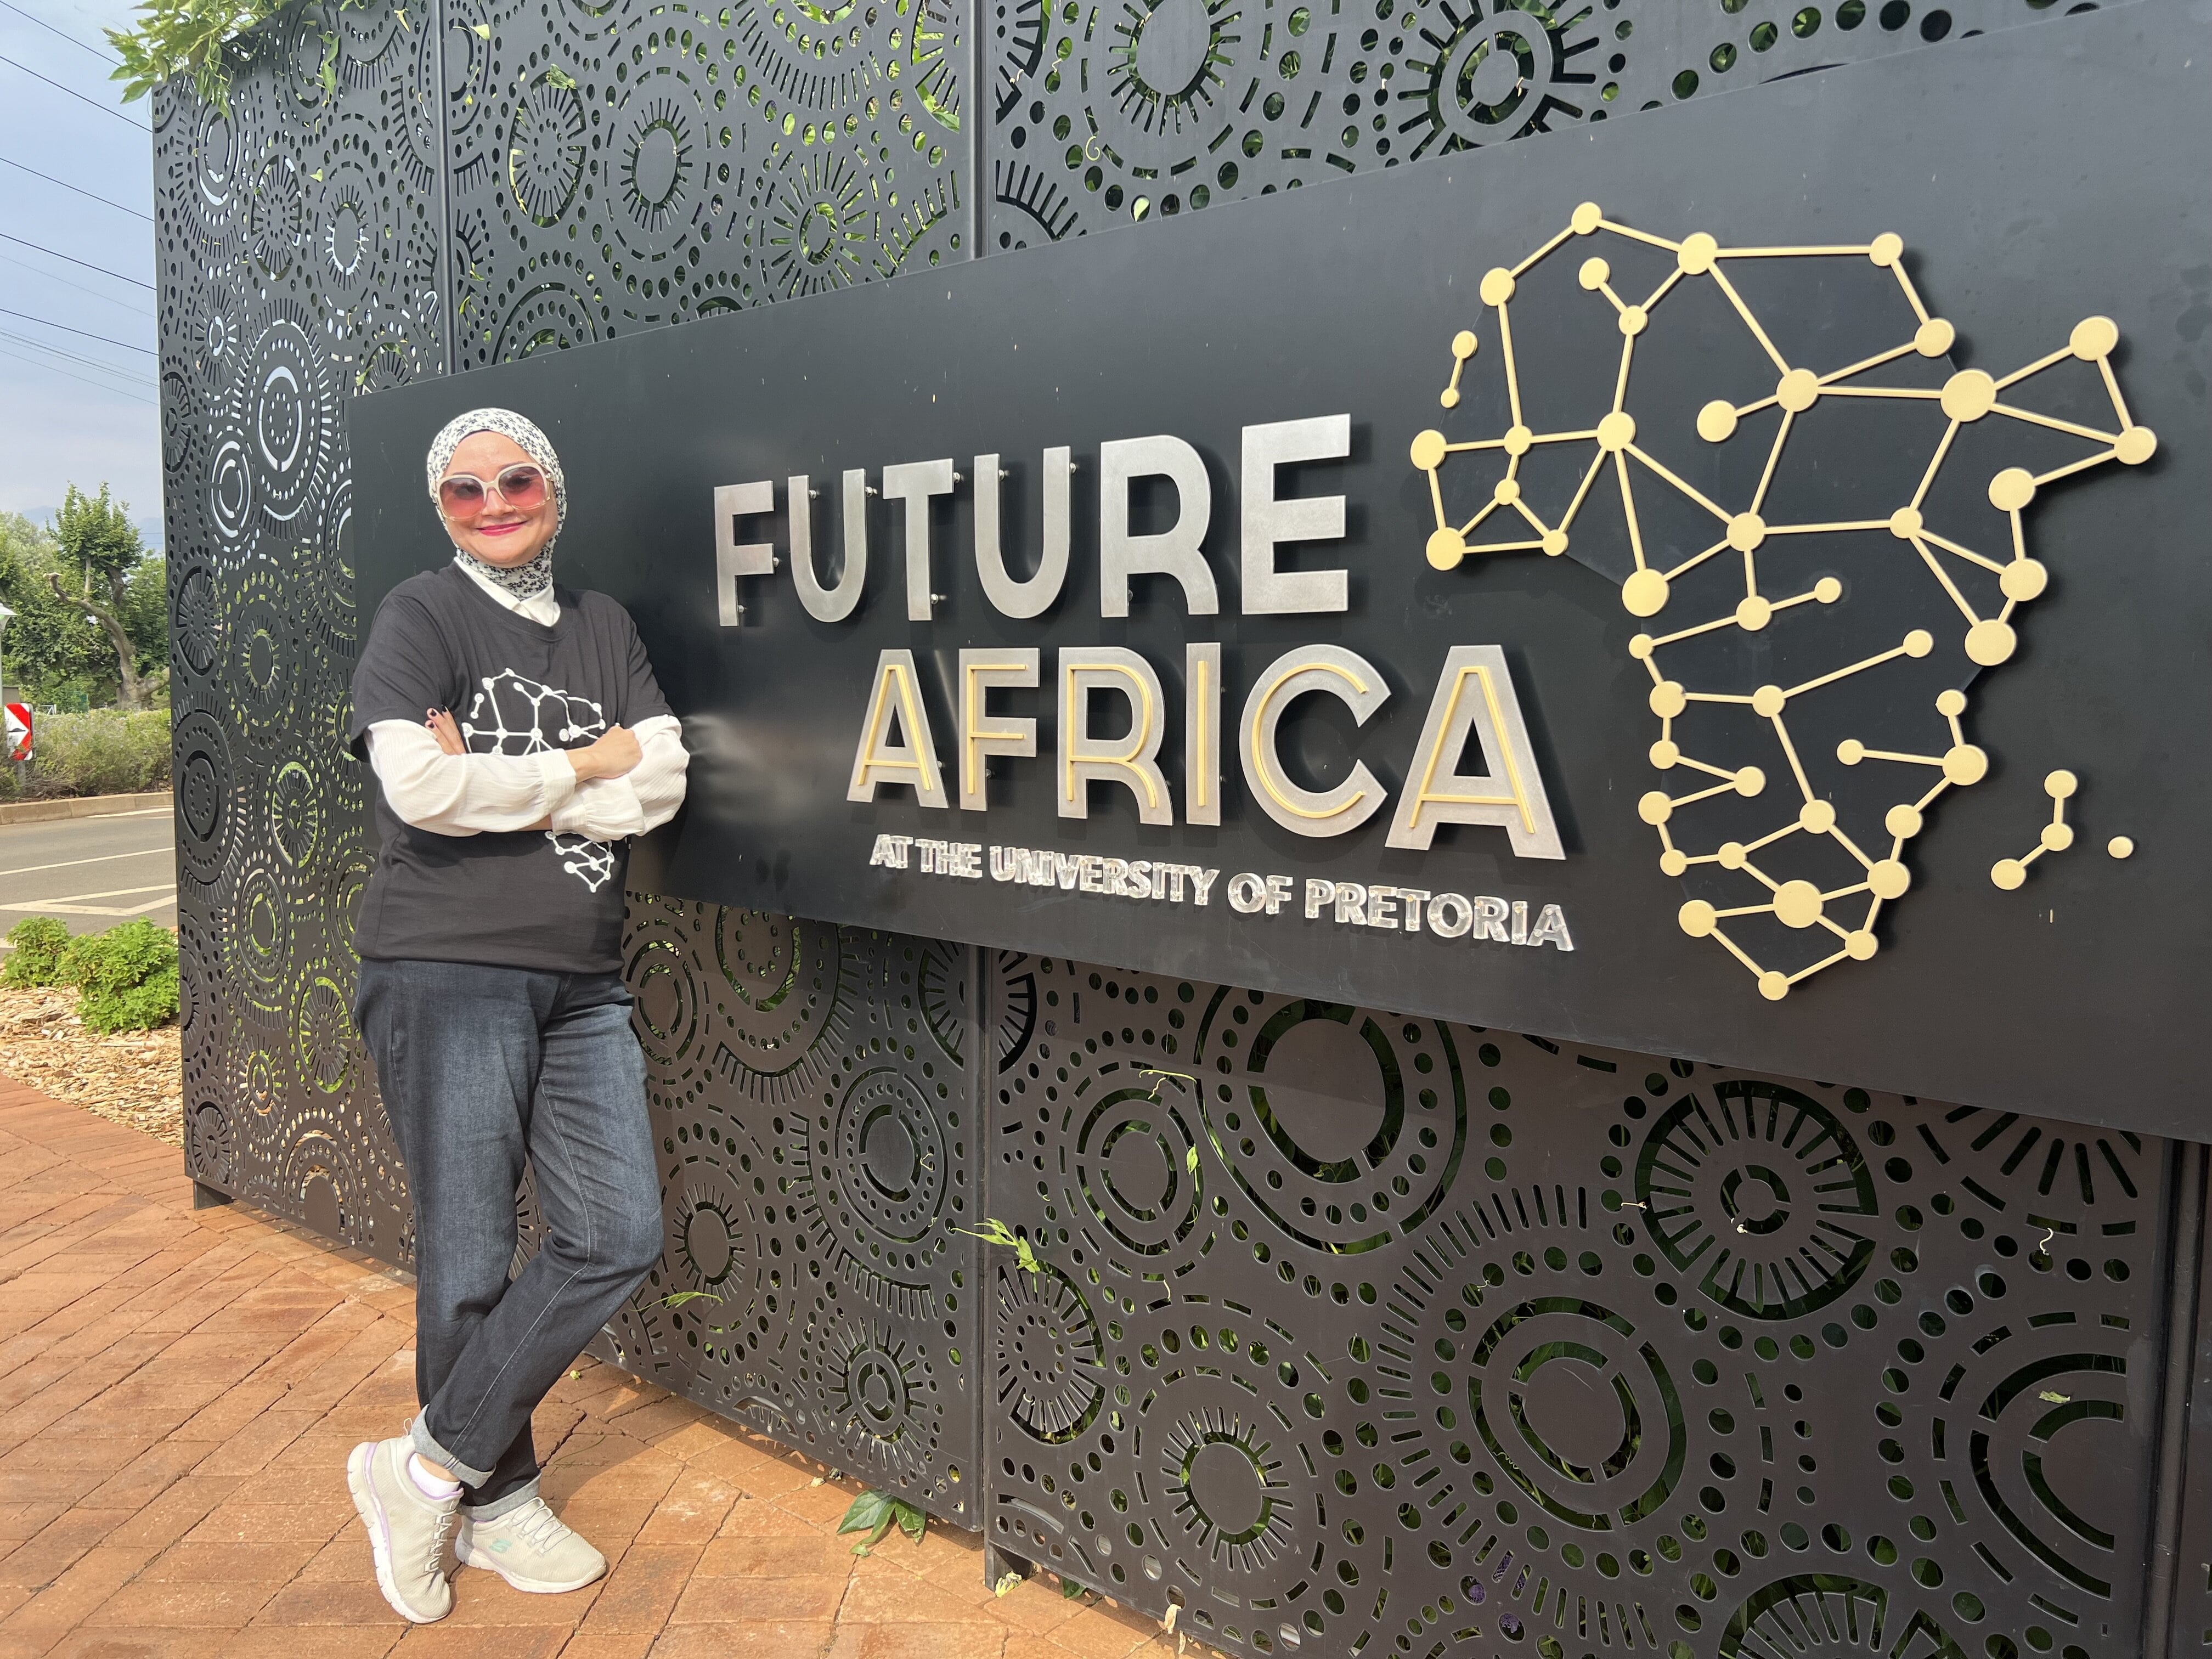  Dr. Lobna A. Said’s Fellowship in the  Africa Science Leadership Programme  (ASLP) at Future Africa